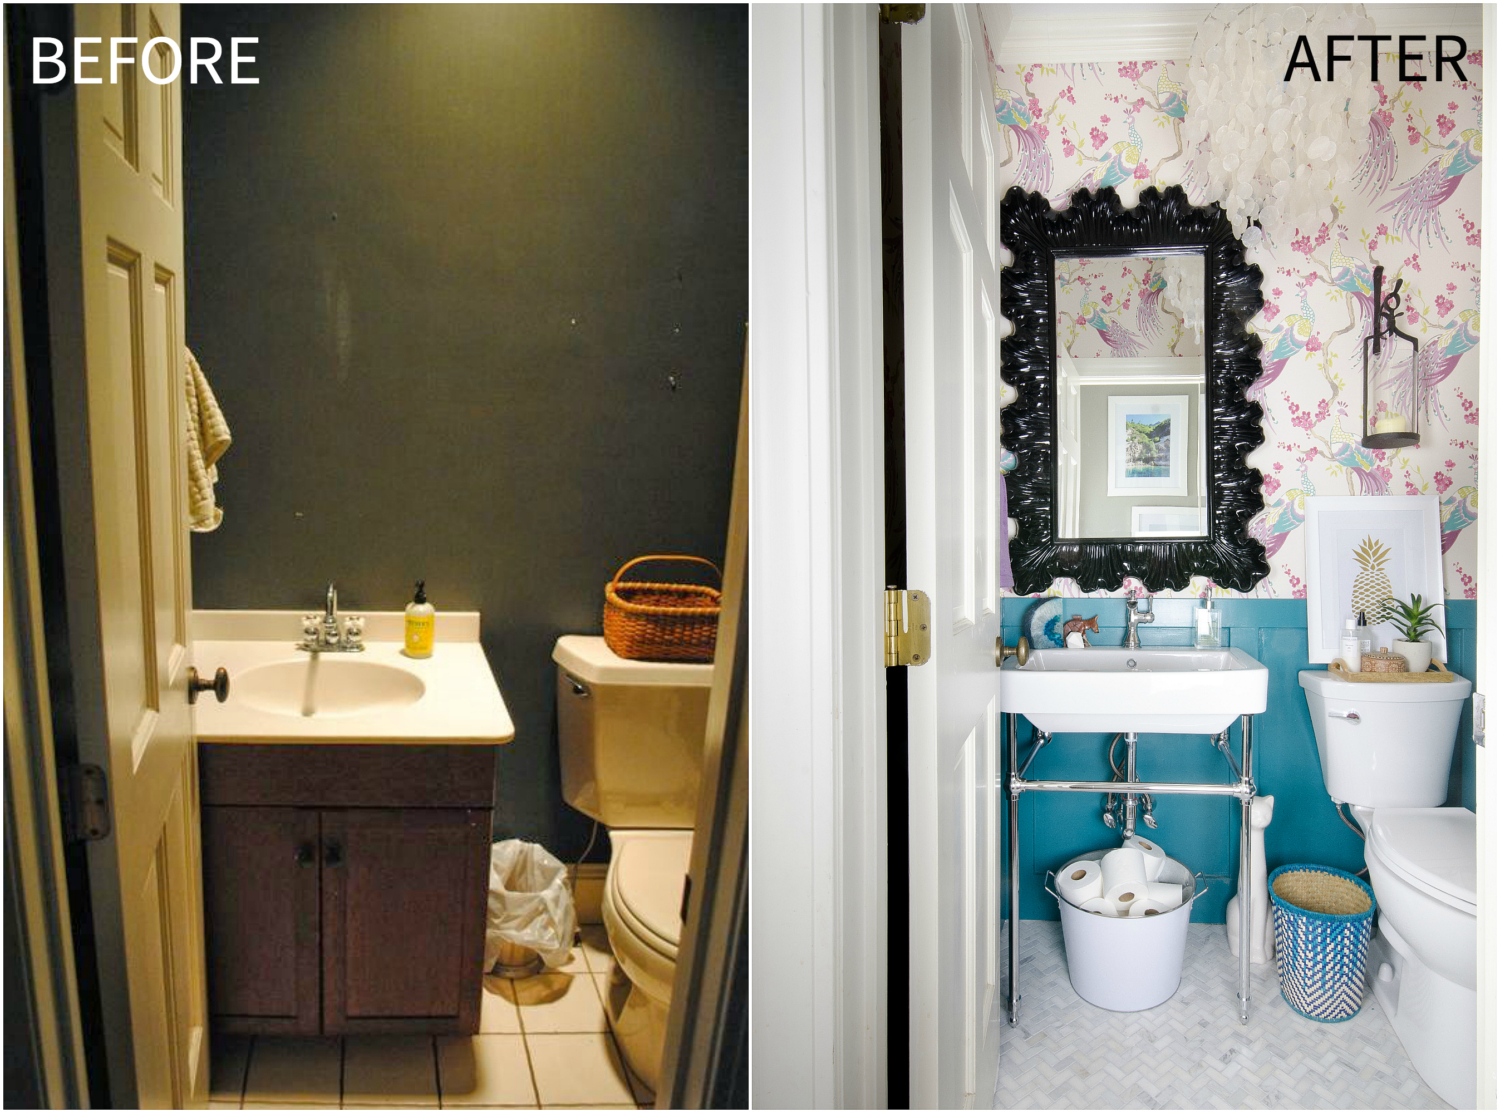 https://www.thechroniclesofhome.com/wp-content/uploads/2017/01/powder-room-before-after-1500x1113.jpg